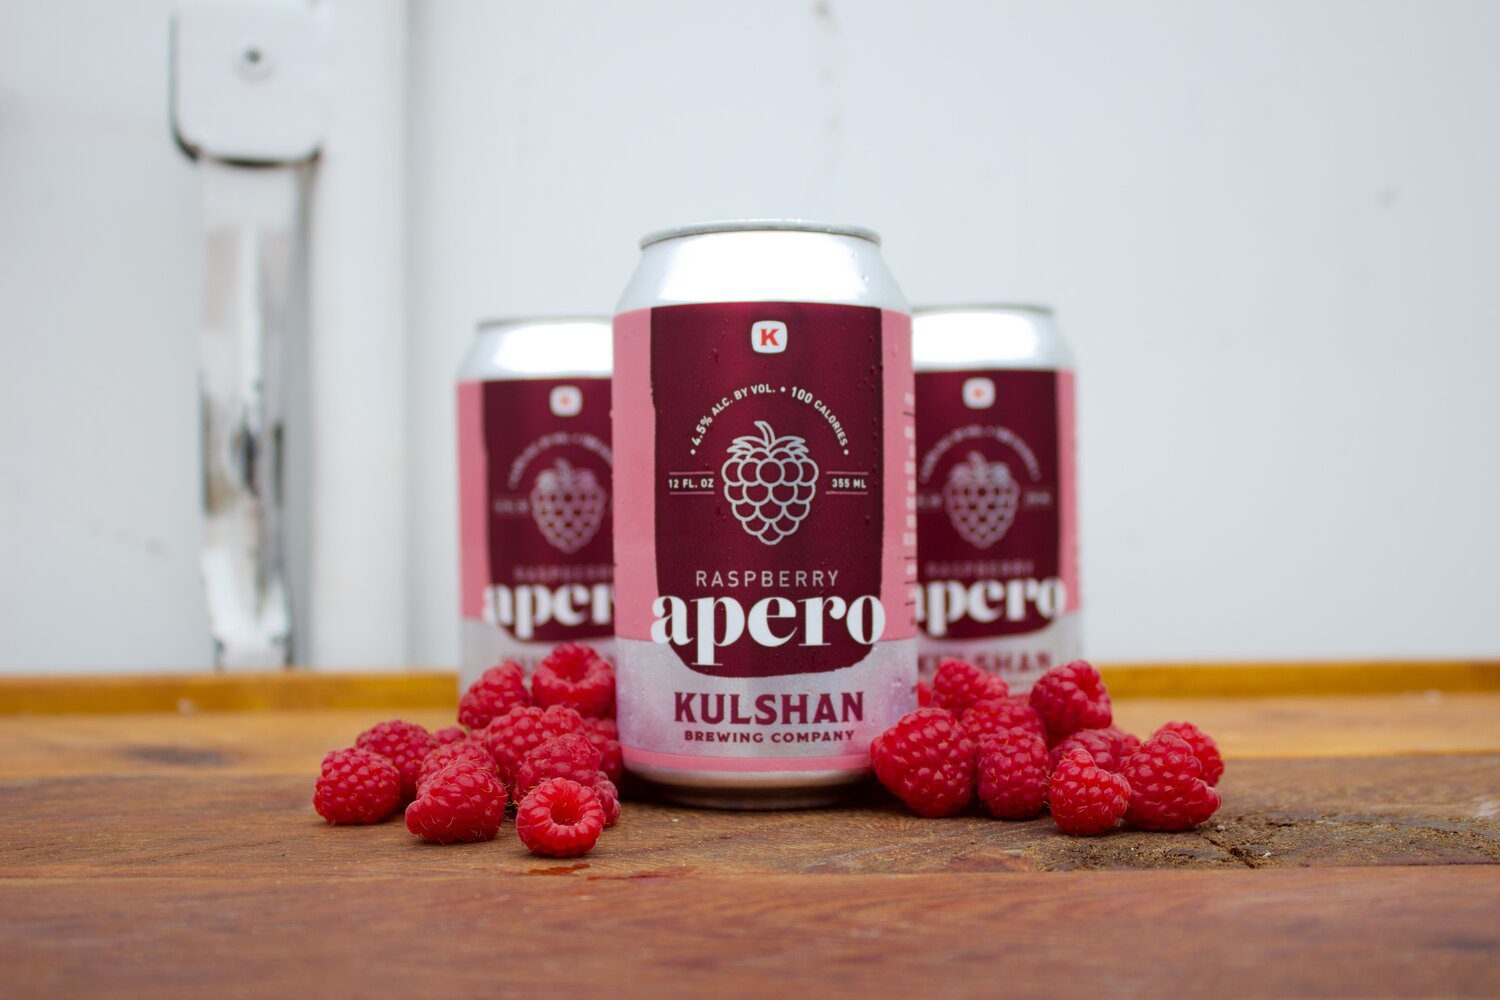 Three cans of raspberry flavored beer sitting on a table.